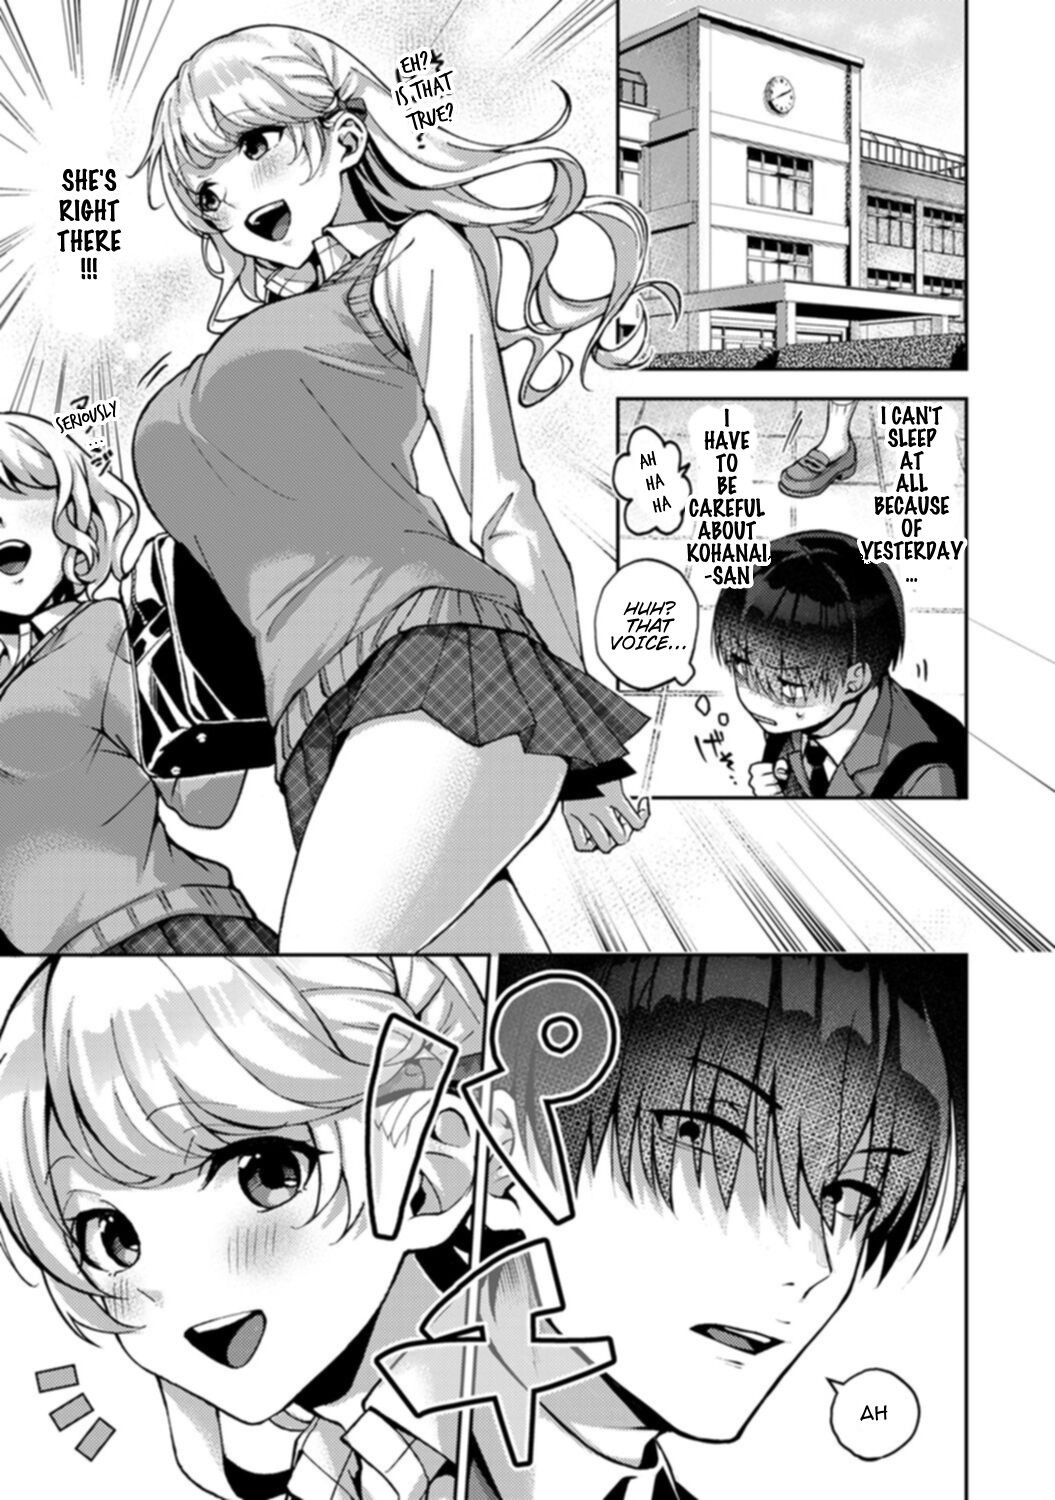 Hentai Manga Comic-My Classmate Is a Young Seductress Who Only Has Eyes For Me-Chapter 2-2